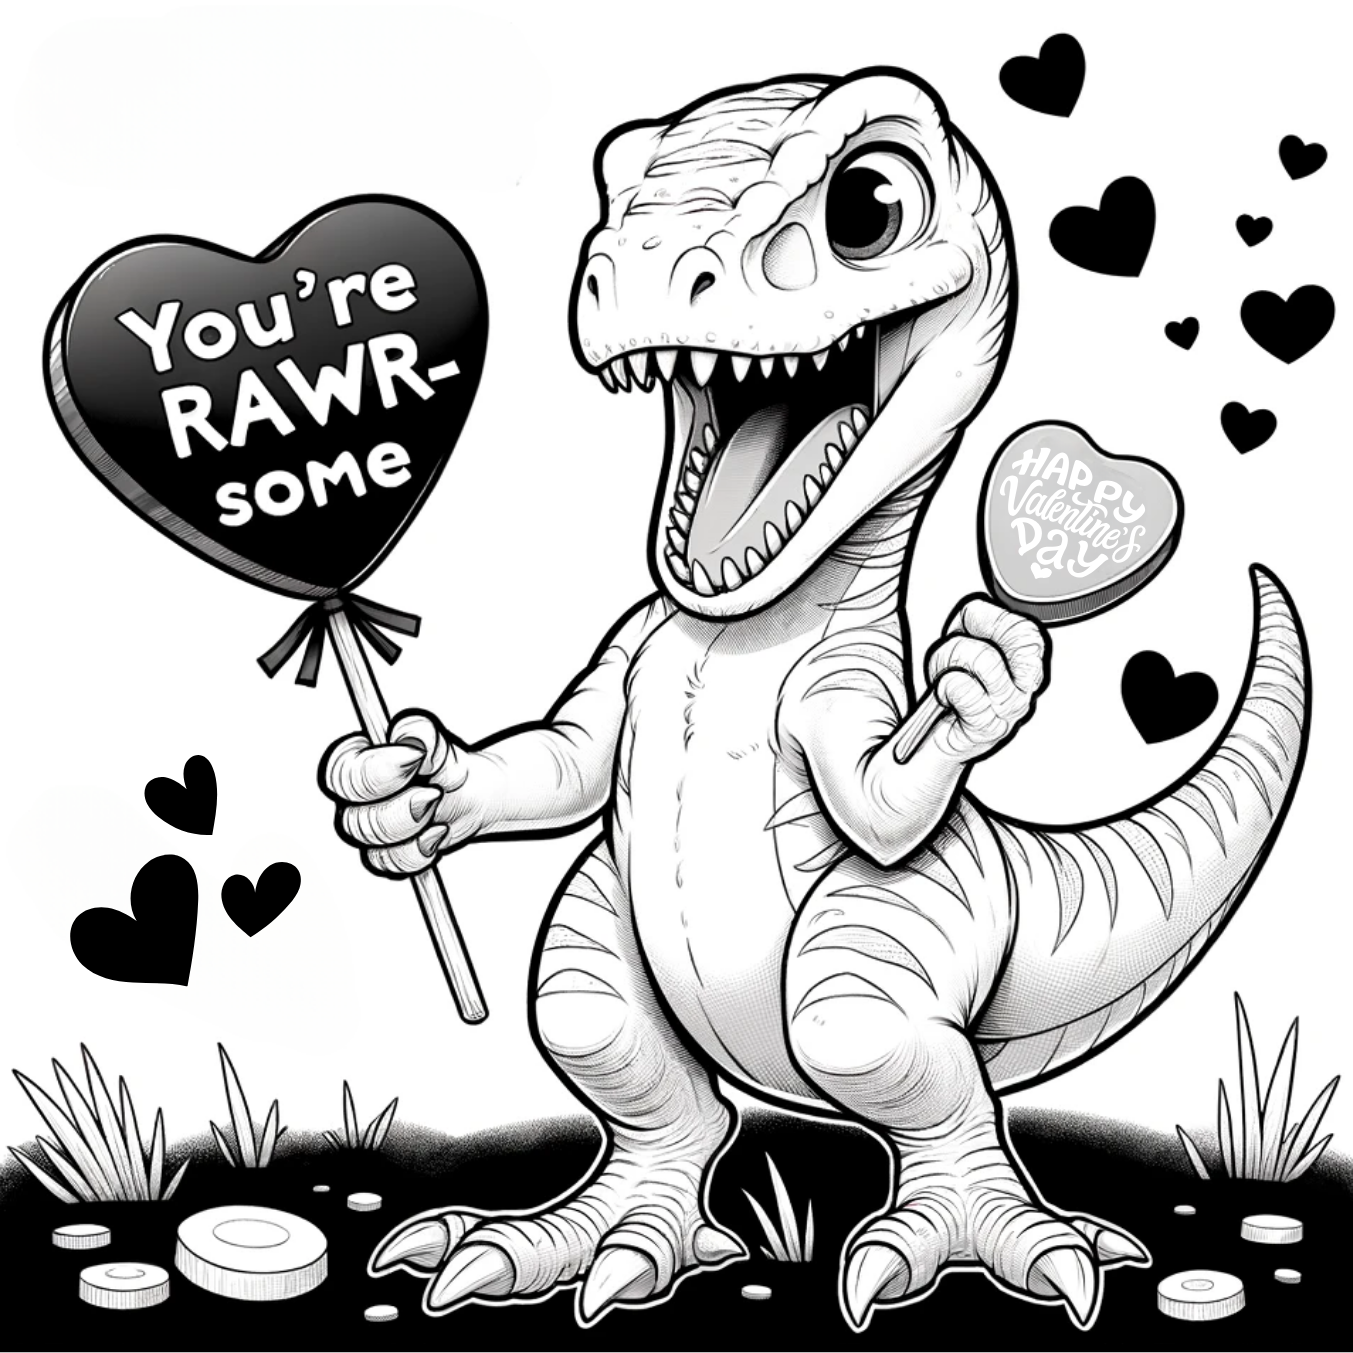 velociraptor excited to give heart candy with personal messages on them to loved ones